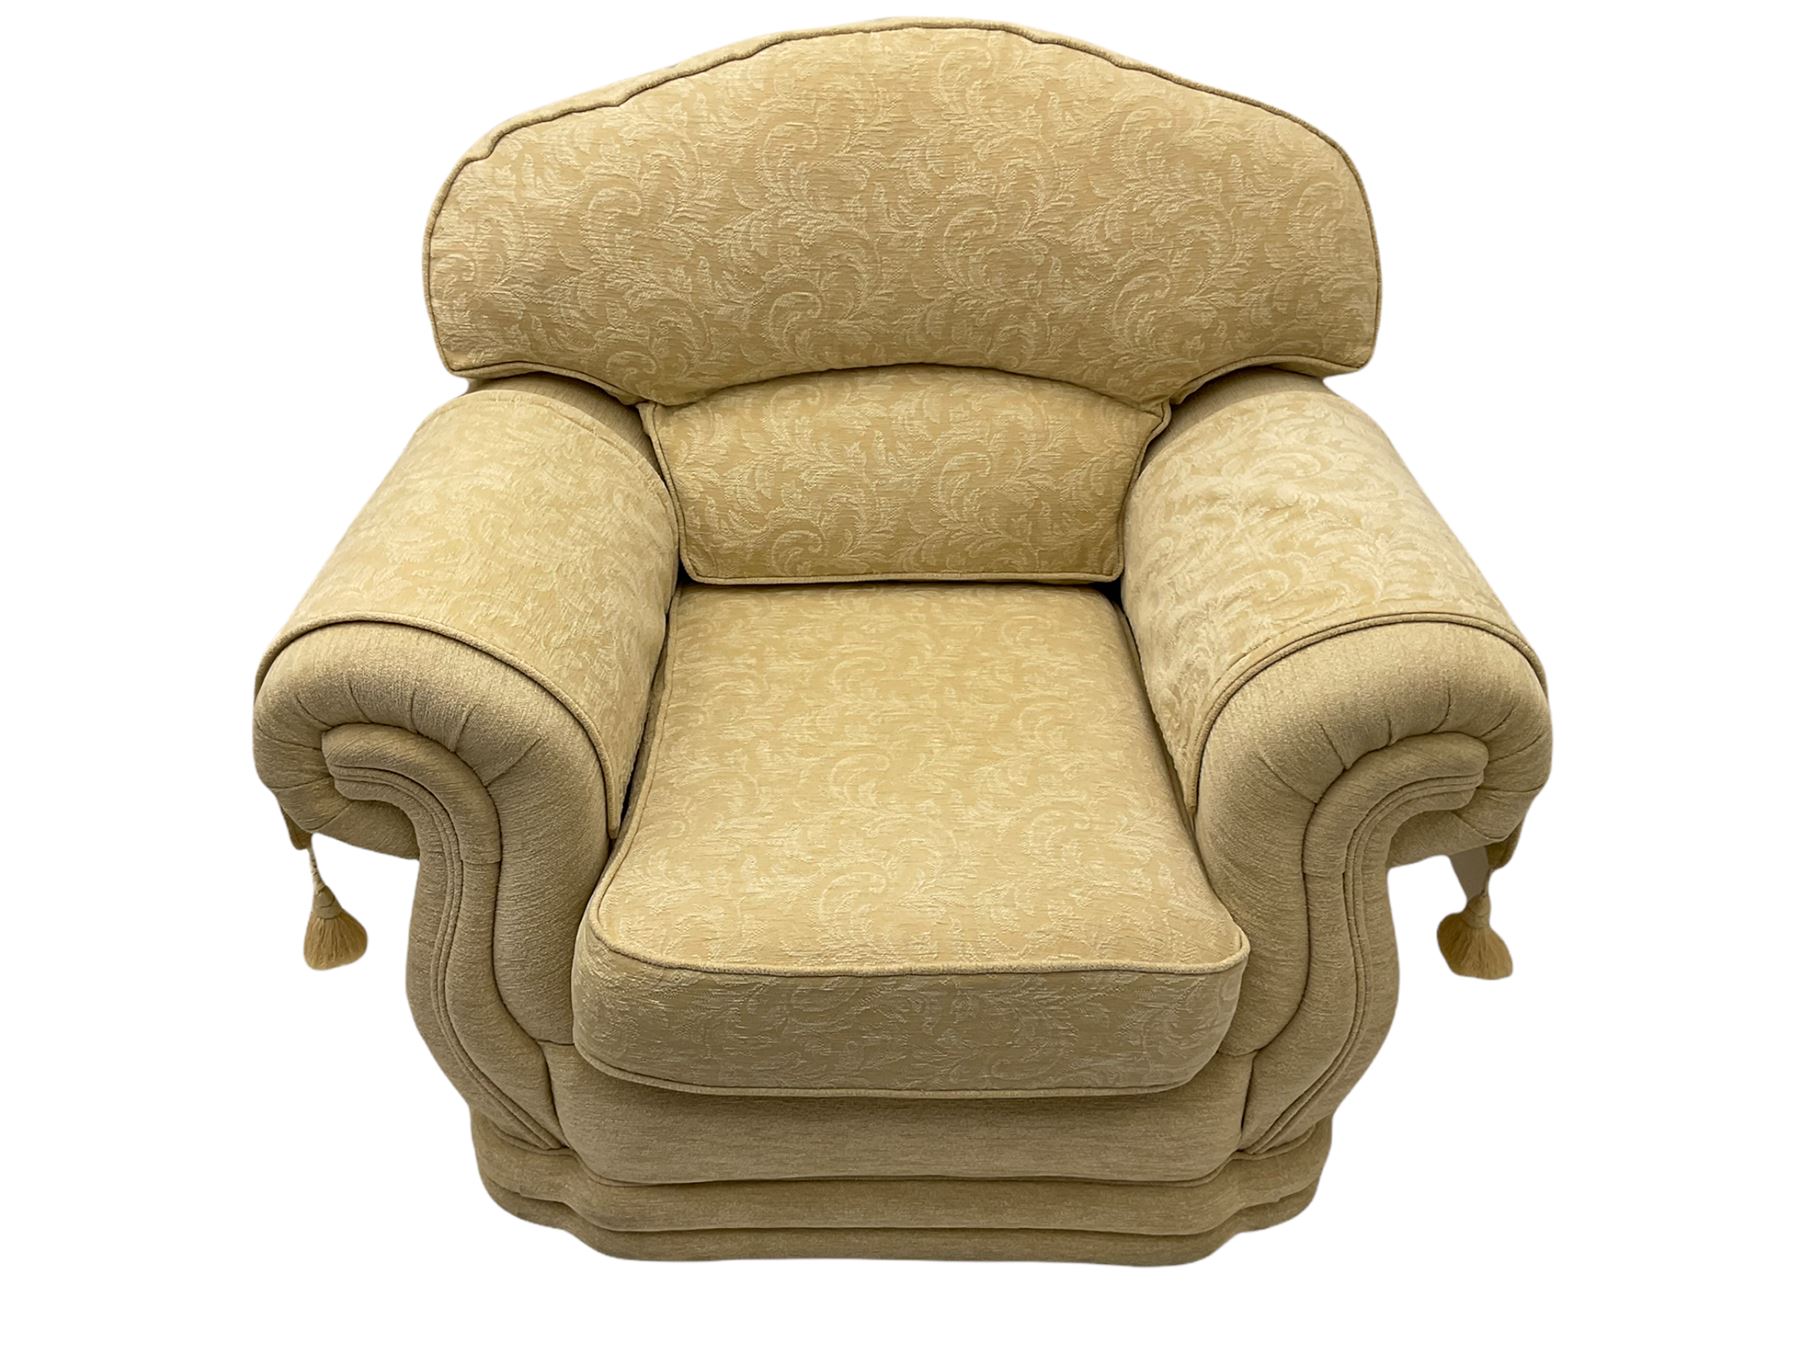 Three piece lounge suite upholstered in beige plain and embossed fabric - Image 6 of 10